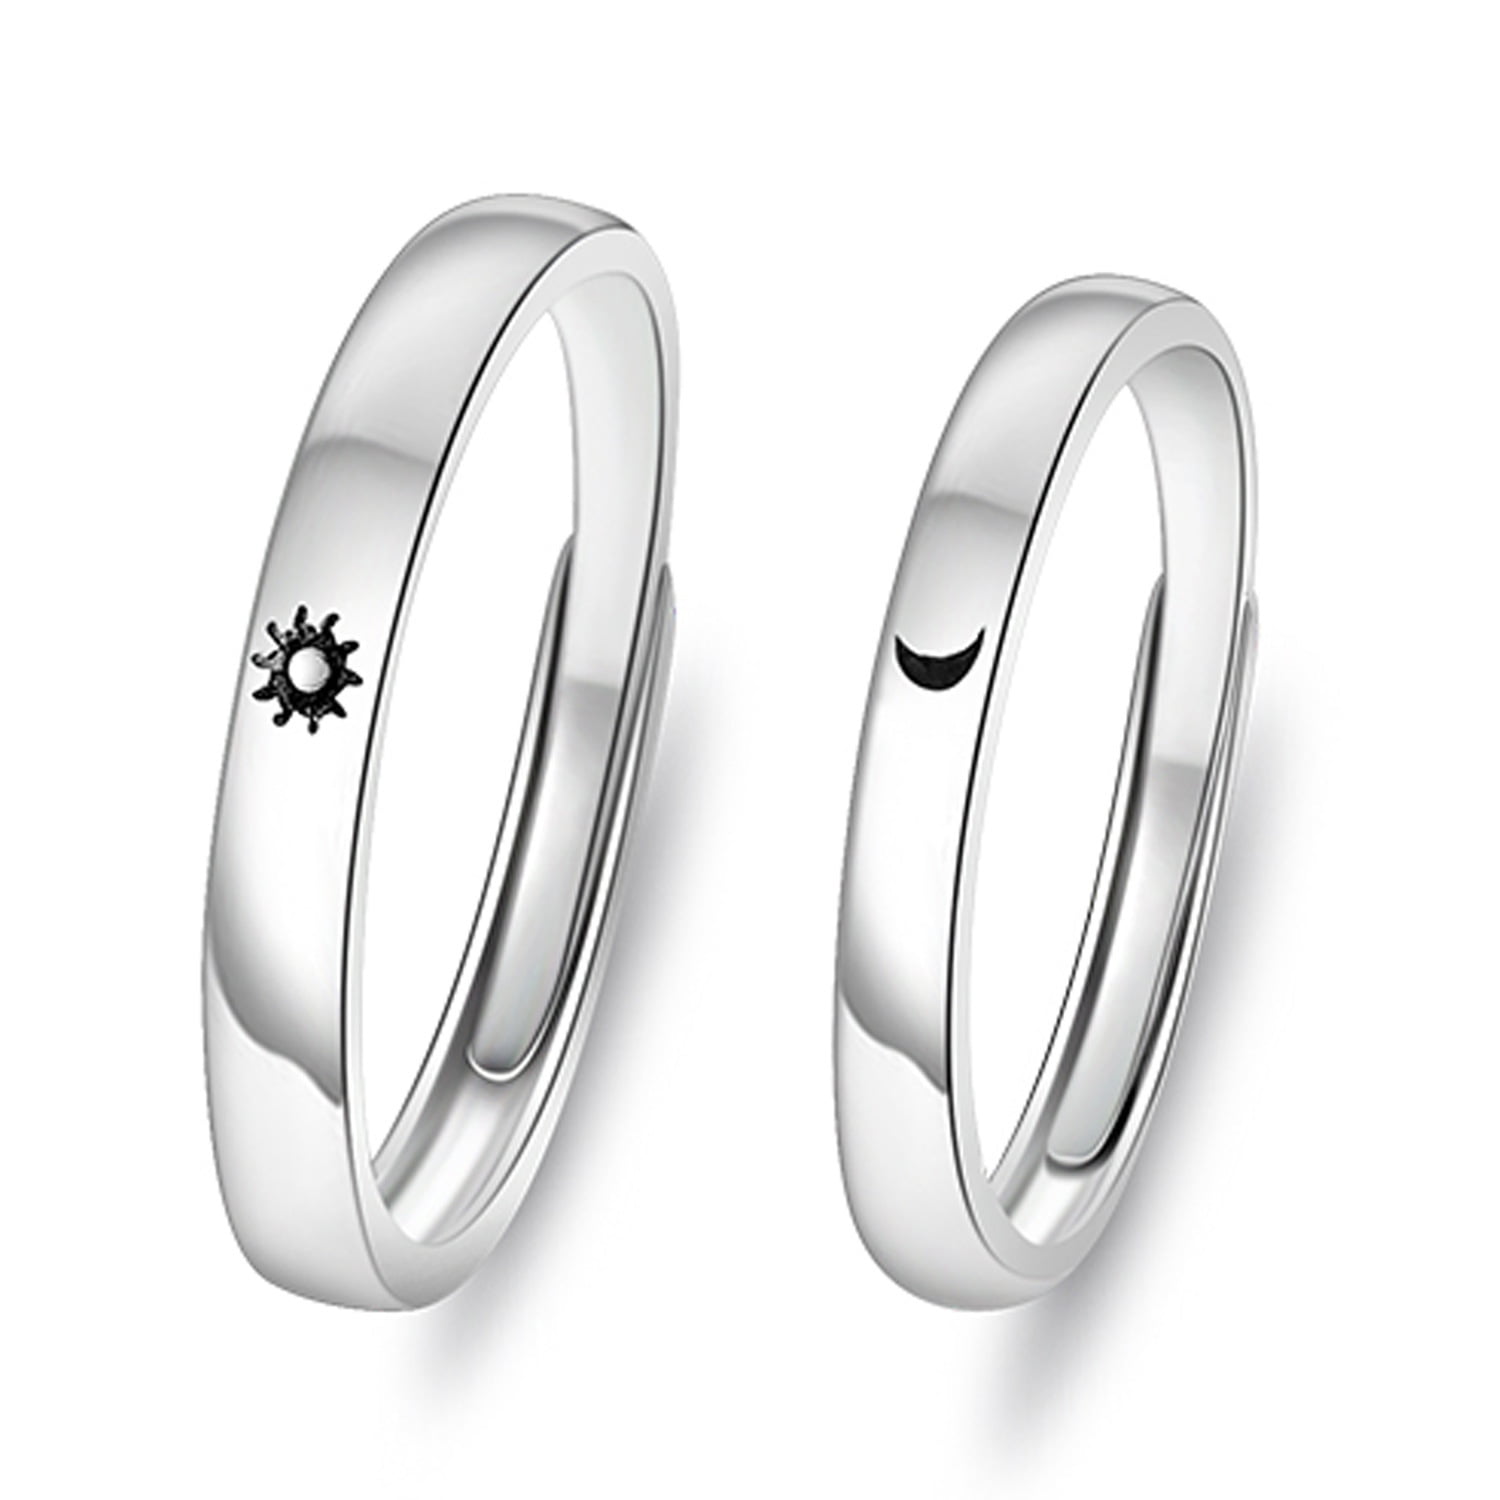 Silver Infinity Couple Rings - Annsh Creations